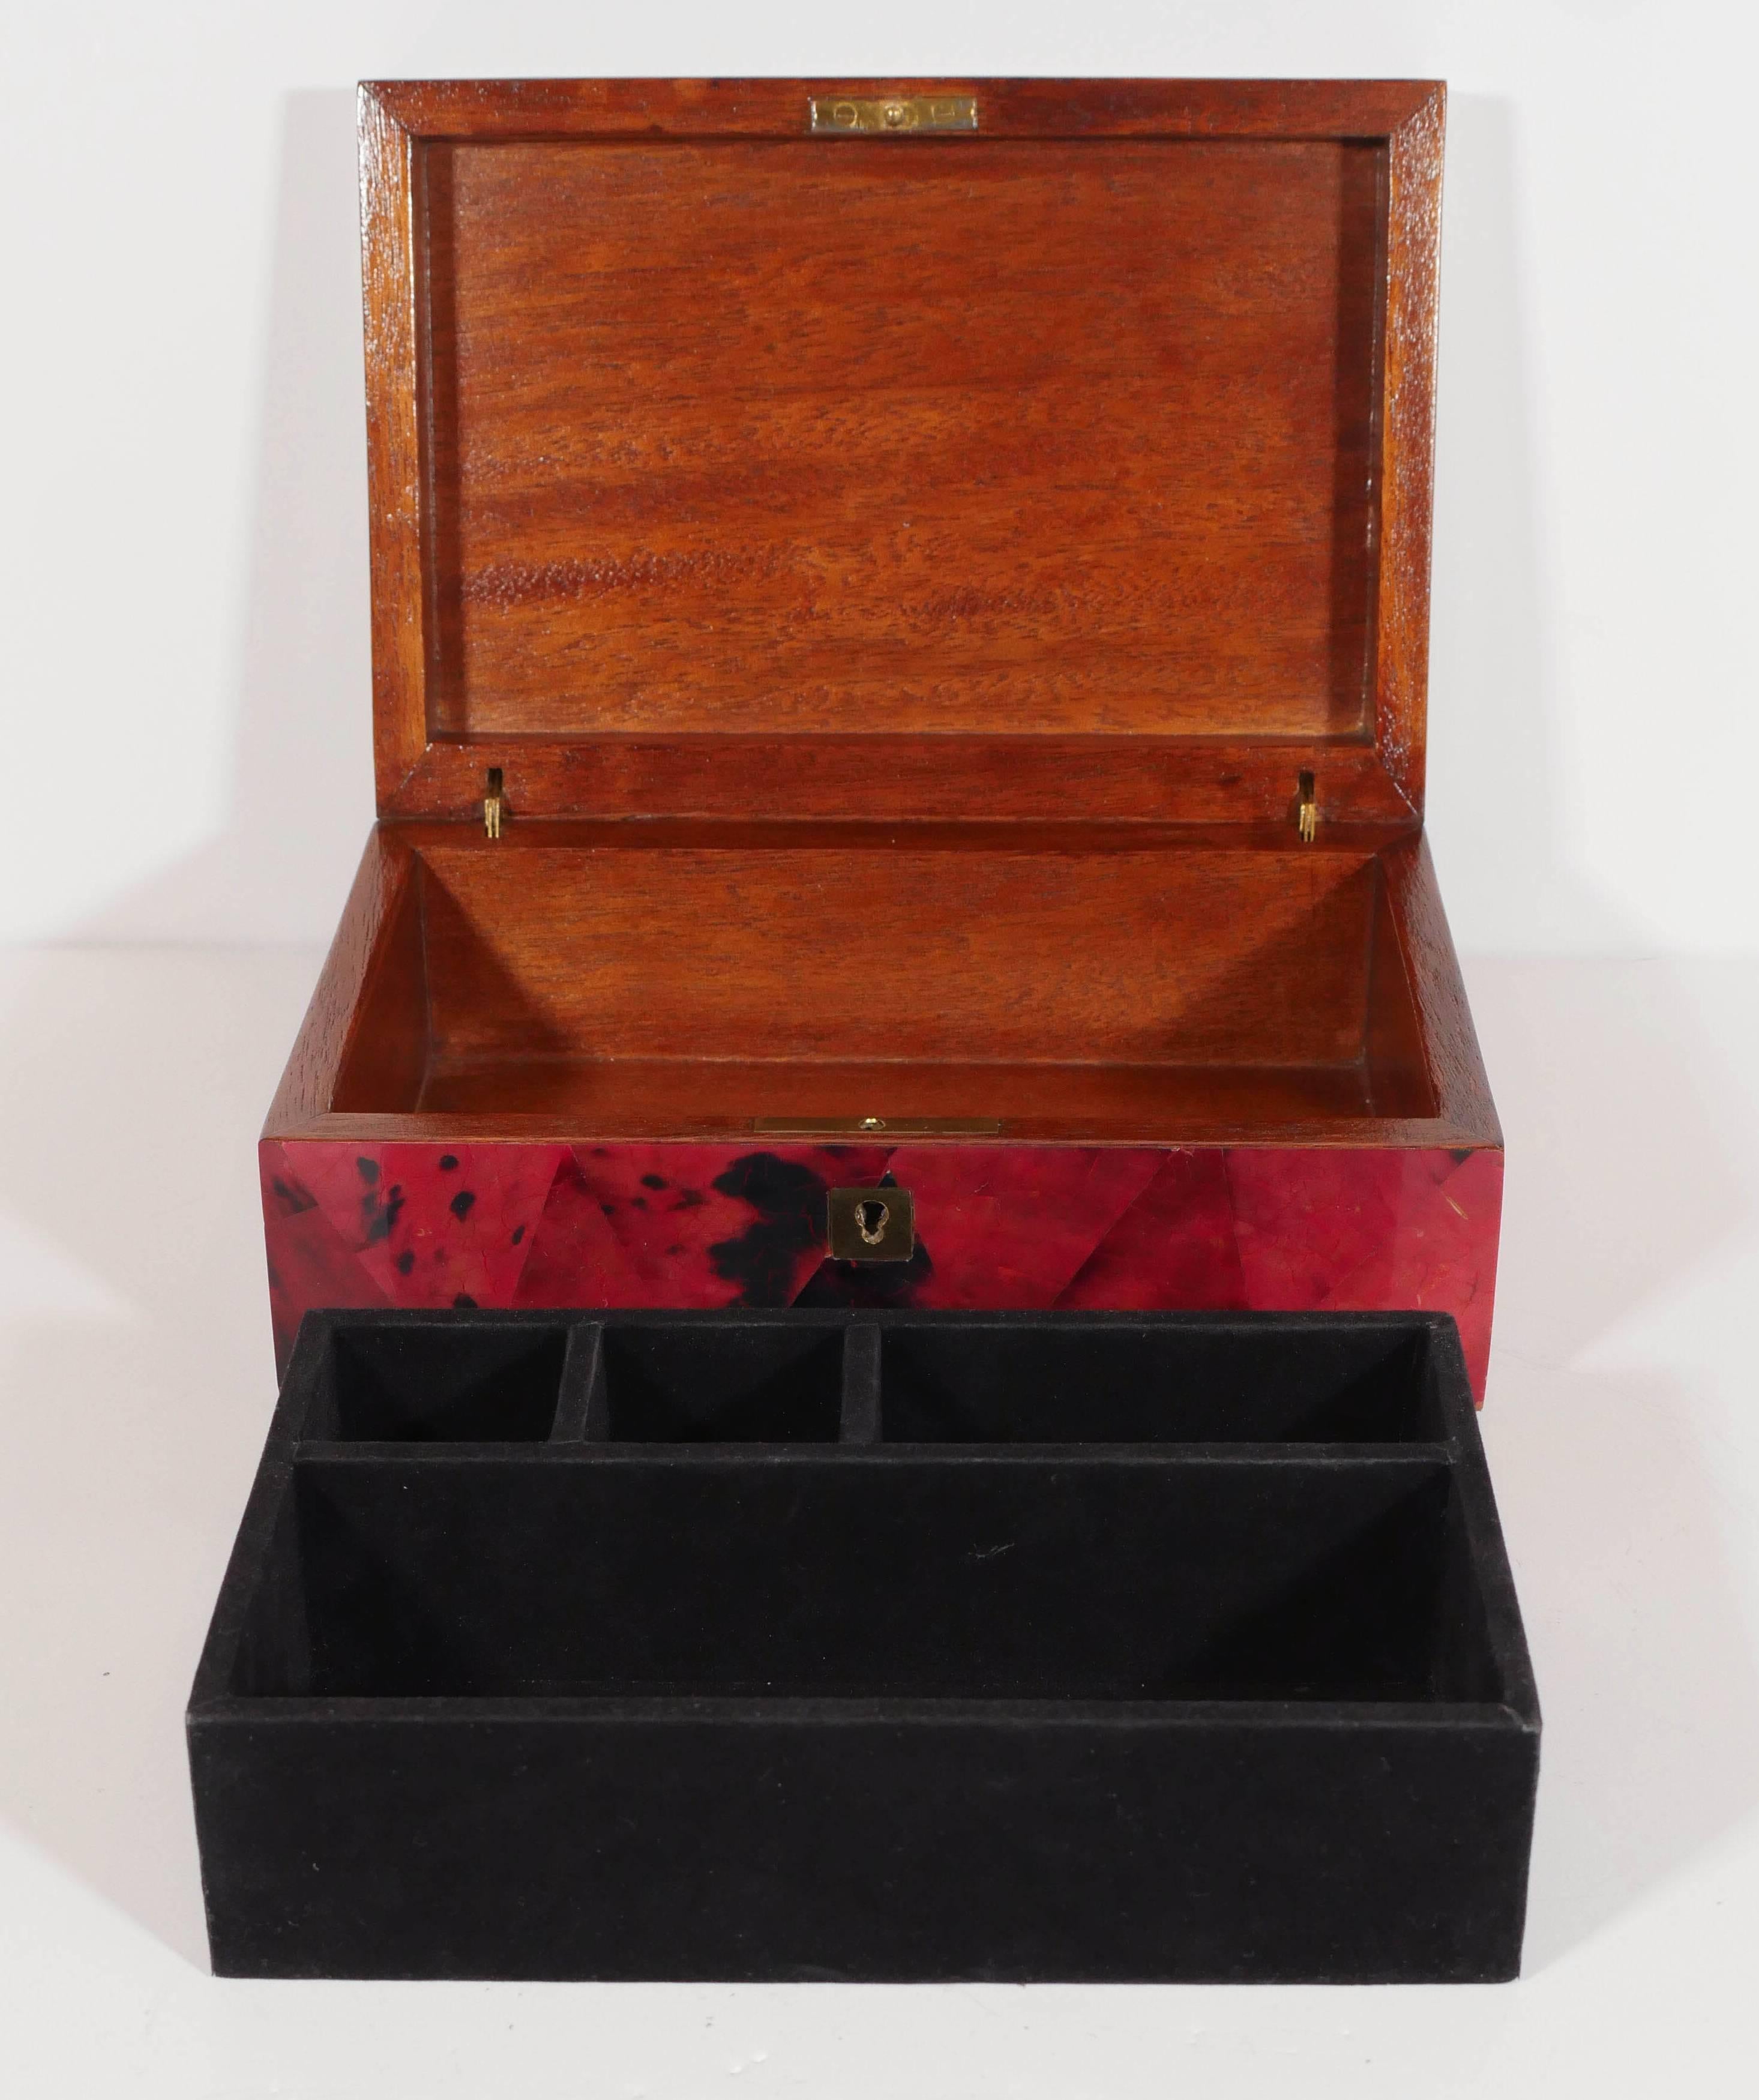 Brass Exceptional Jewelry Box in Lacquered Pen Shell with Exotic Feather Accents